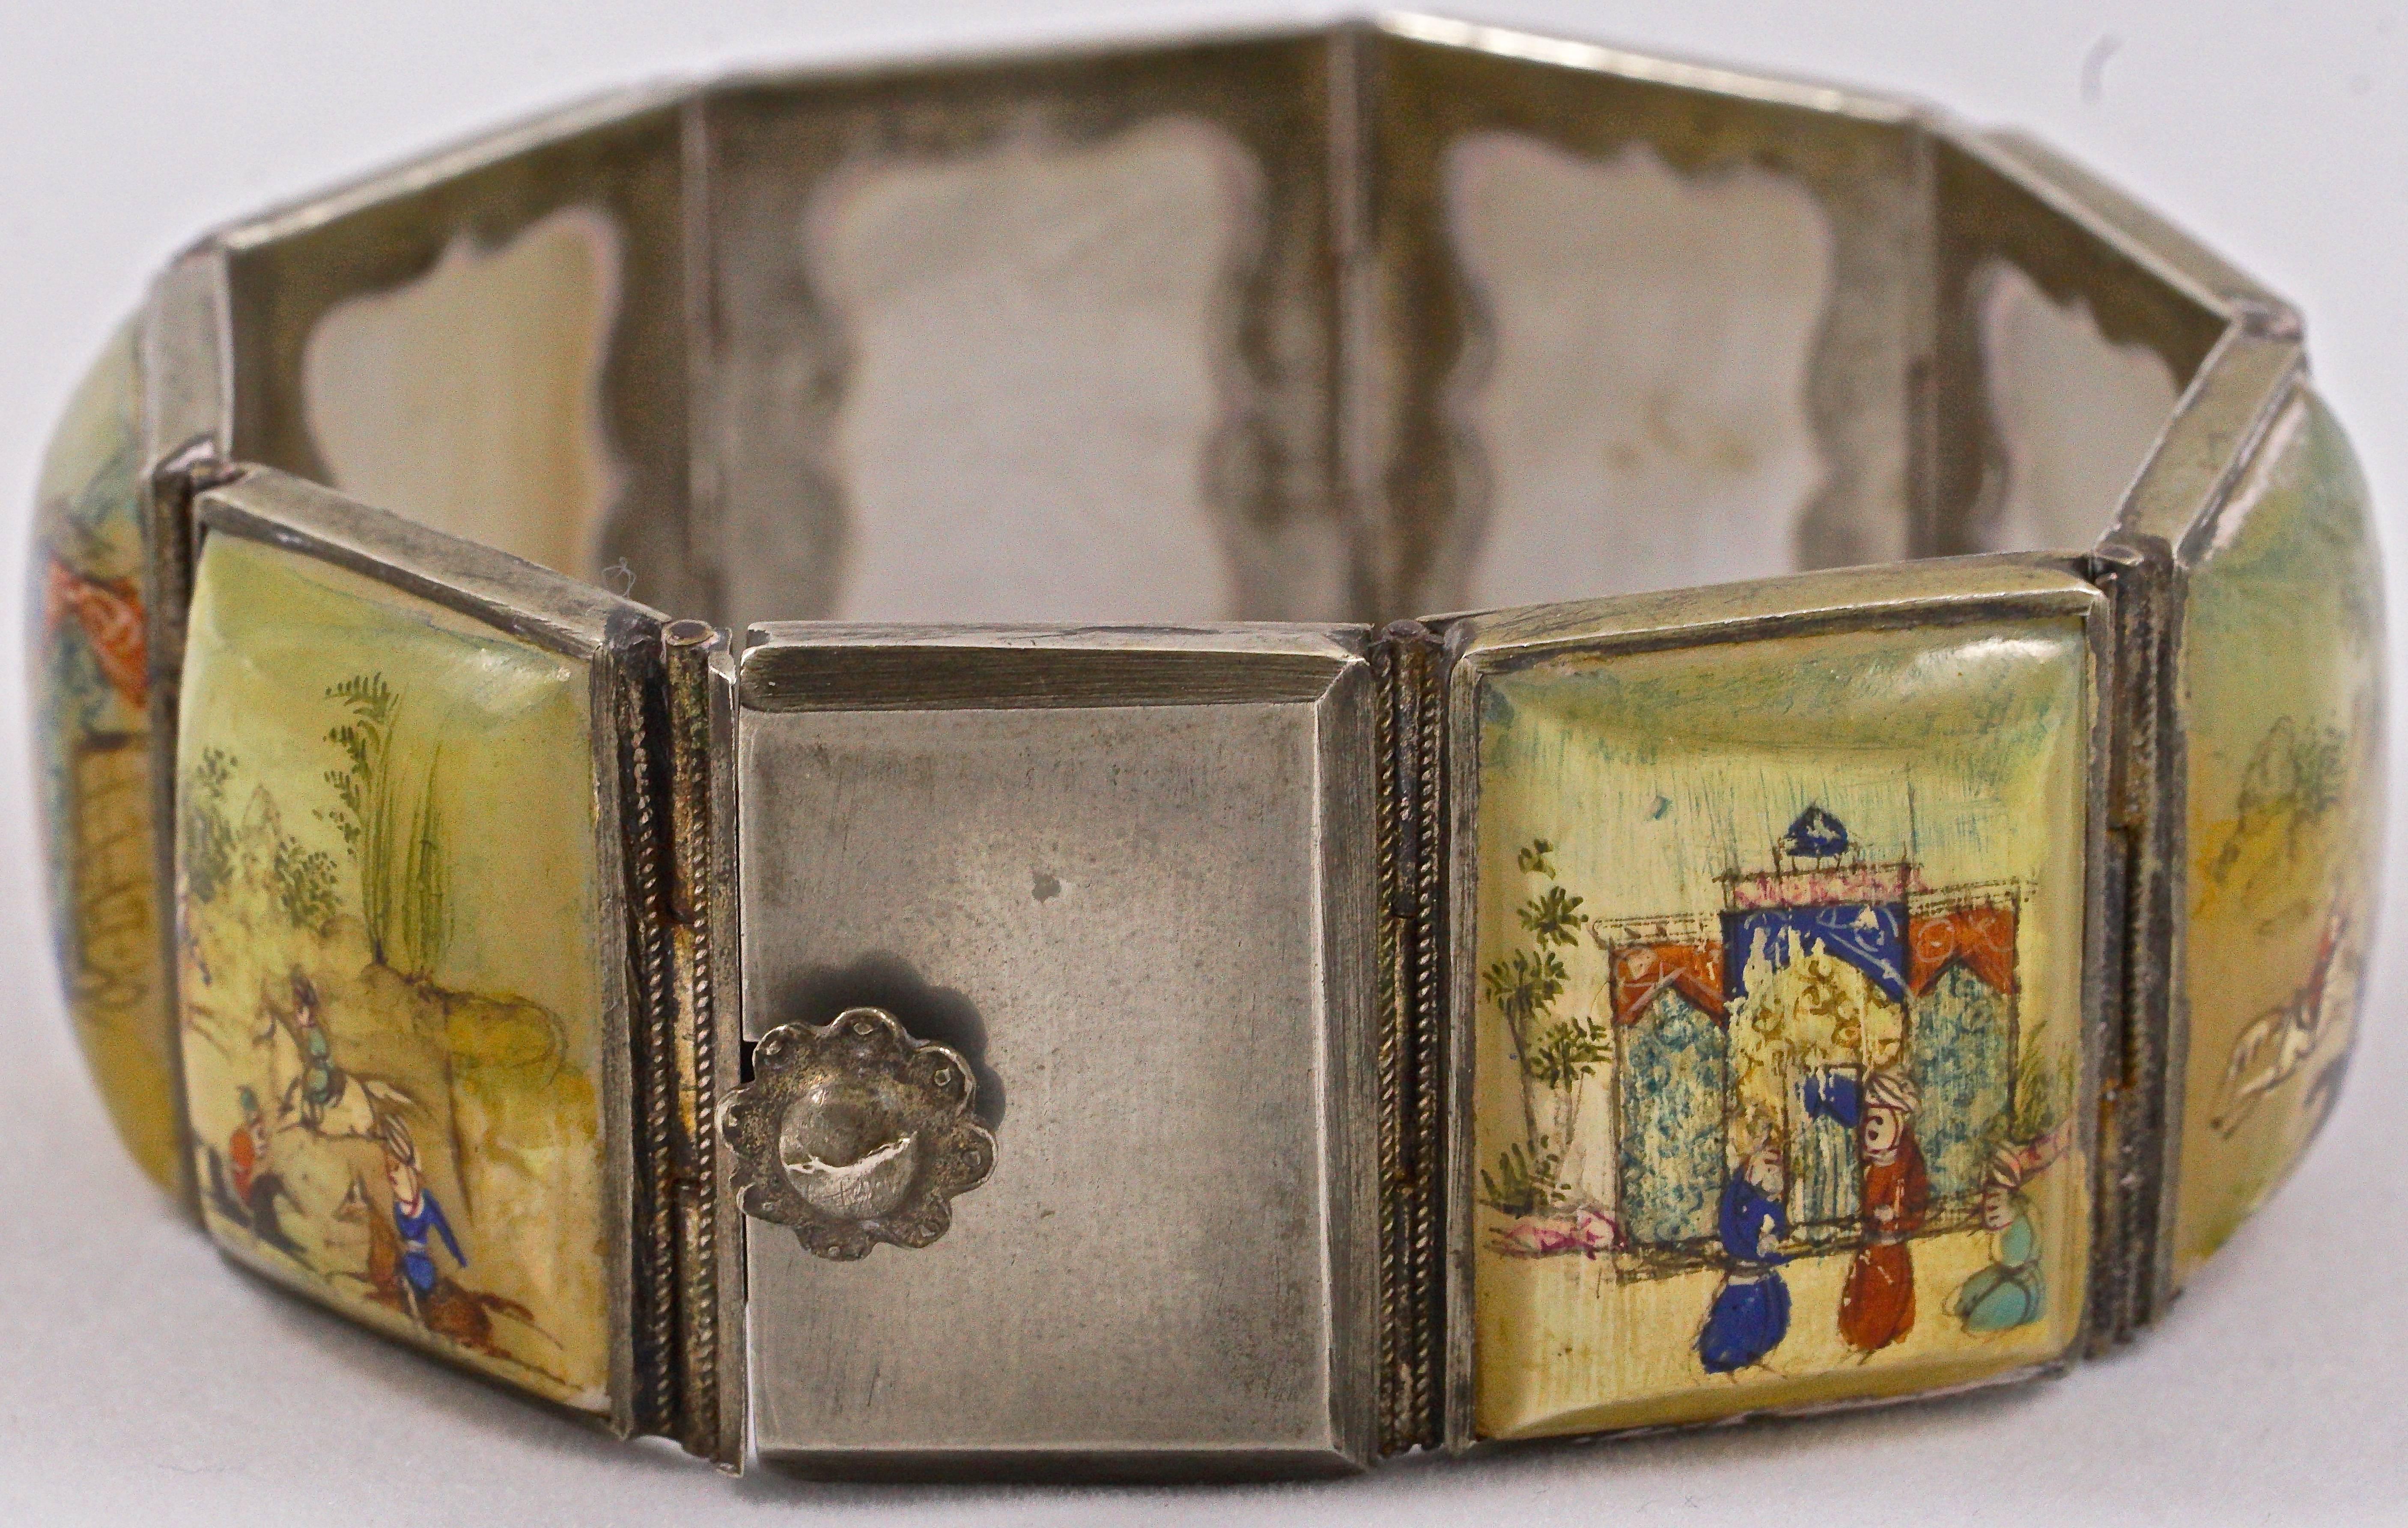 Beautiful Arabic silver tone and mother of pearl panel bracelet. The mother of pearl has been exquisitely hand painted and lacquered. It is stamped with an Arabic name, probably the makers, the first part of the name is Abd, the second part is